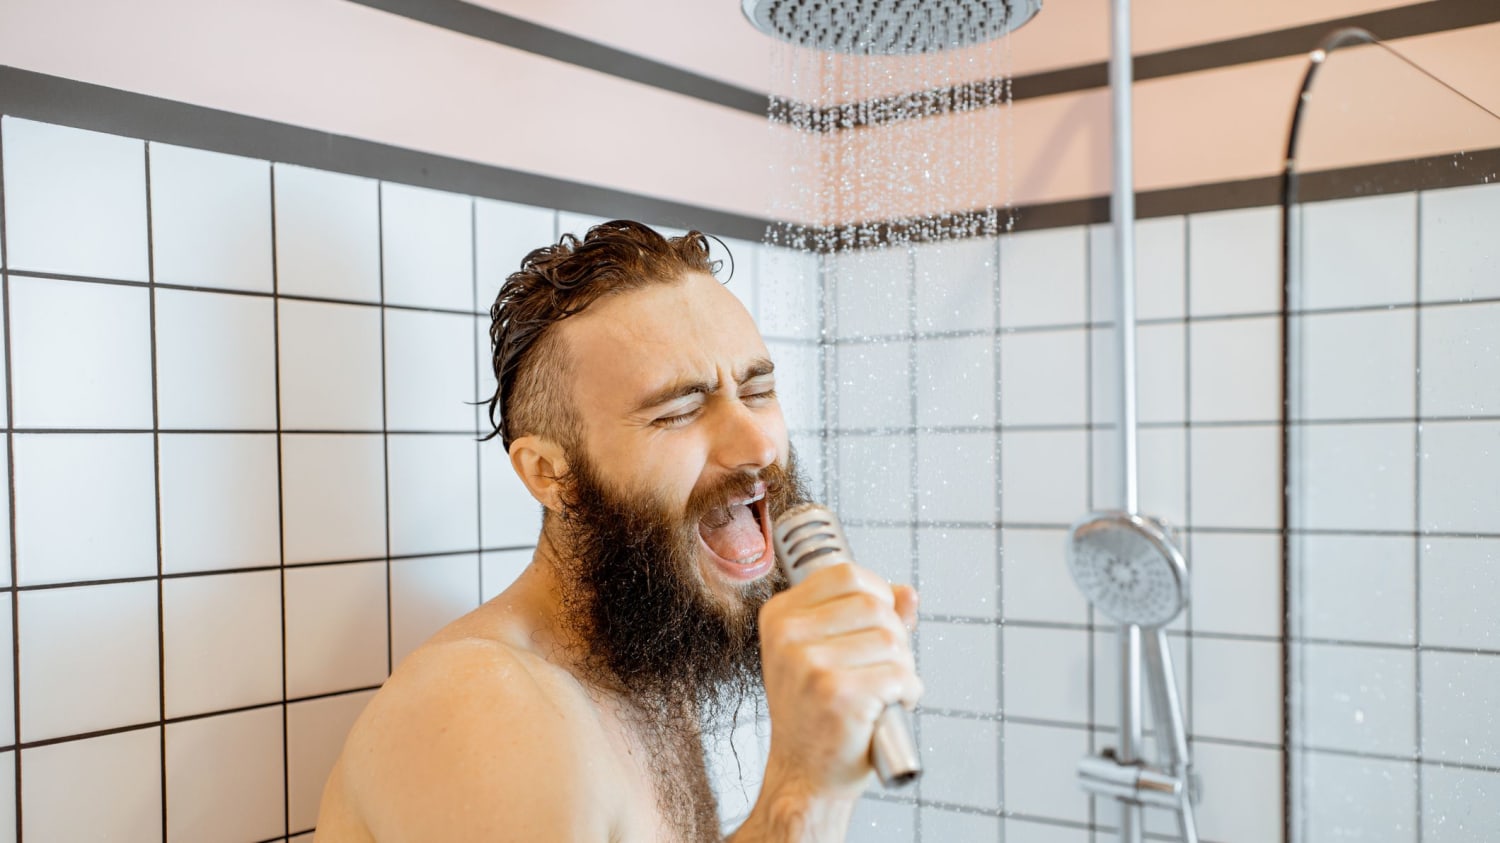 20 Most Popular Songs to Sing in the Shower